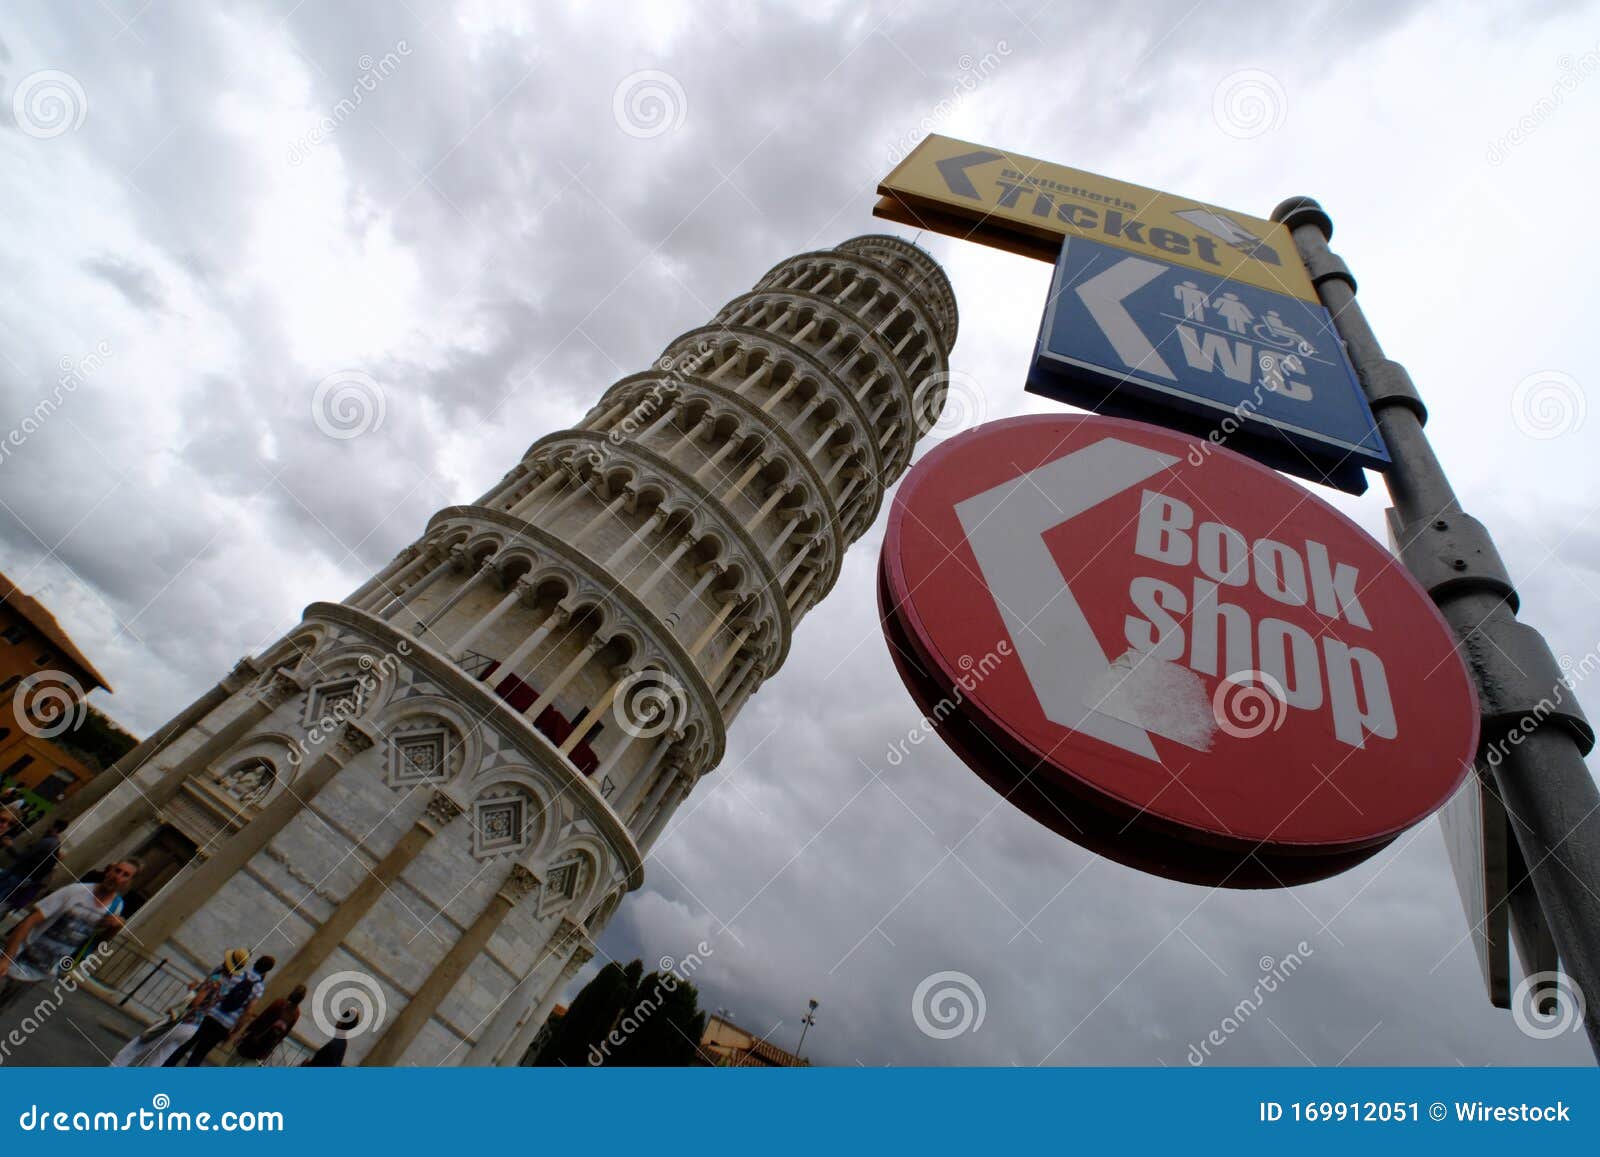 turism in italy, pissa tower signs and posts